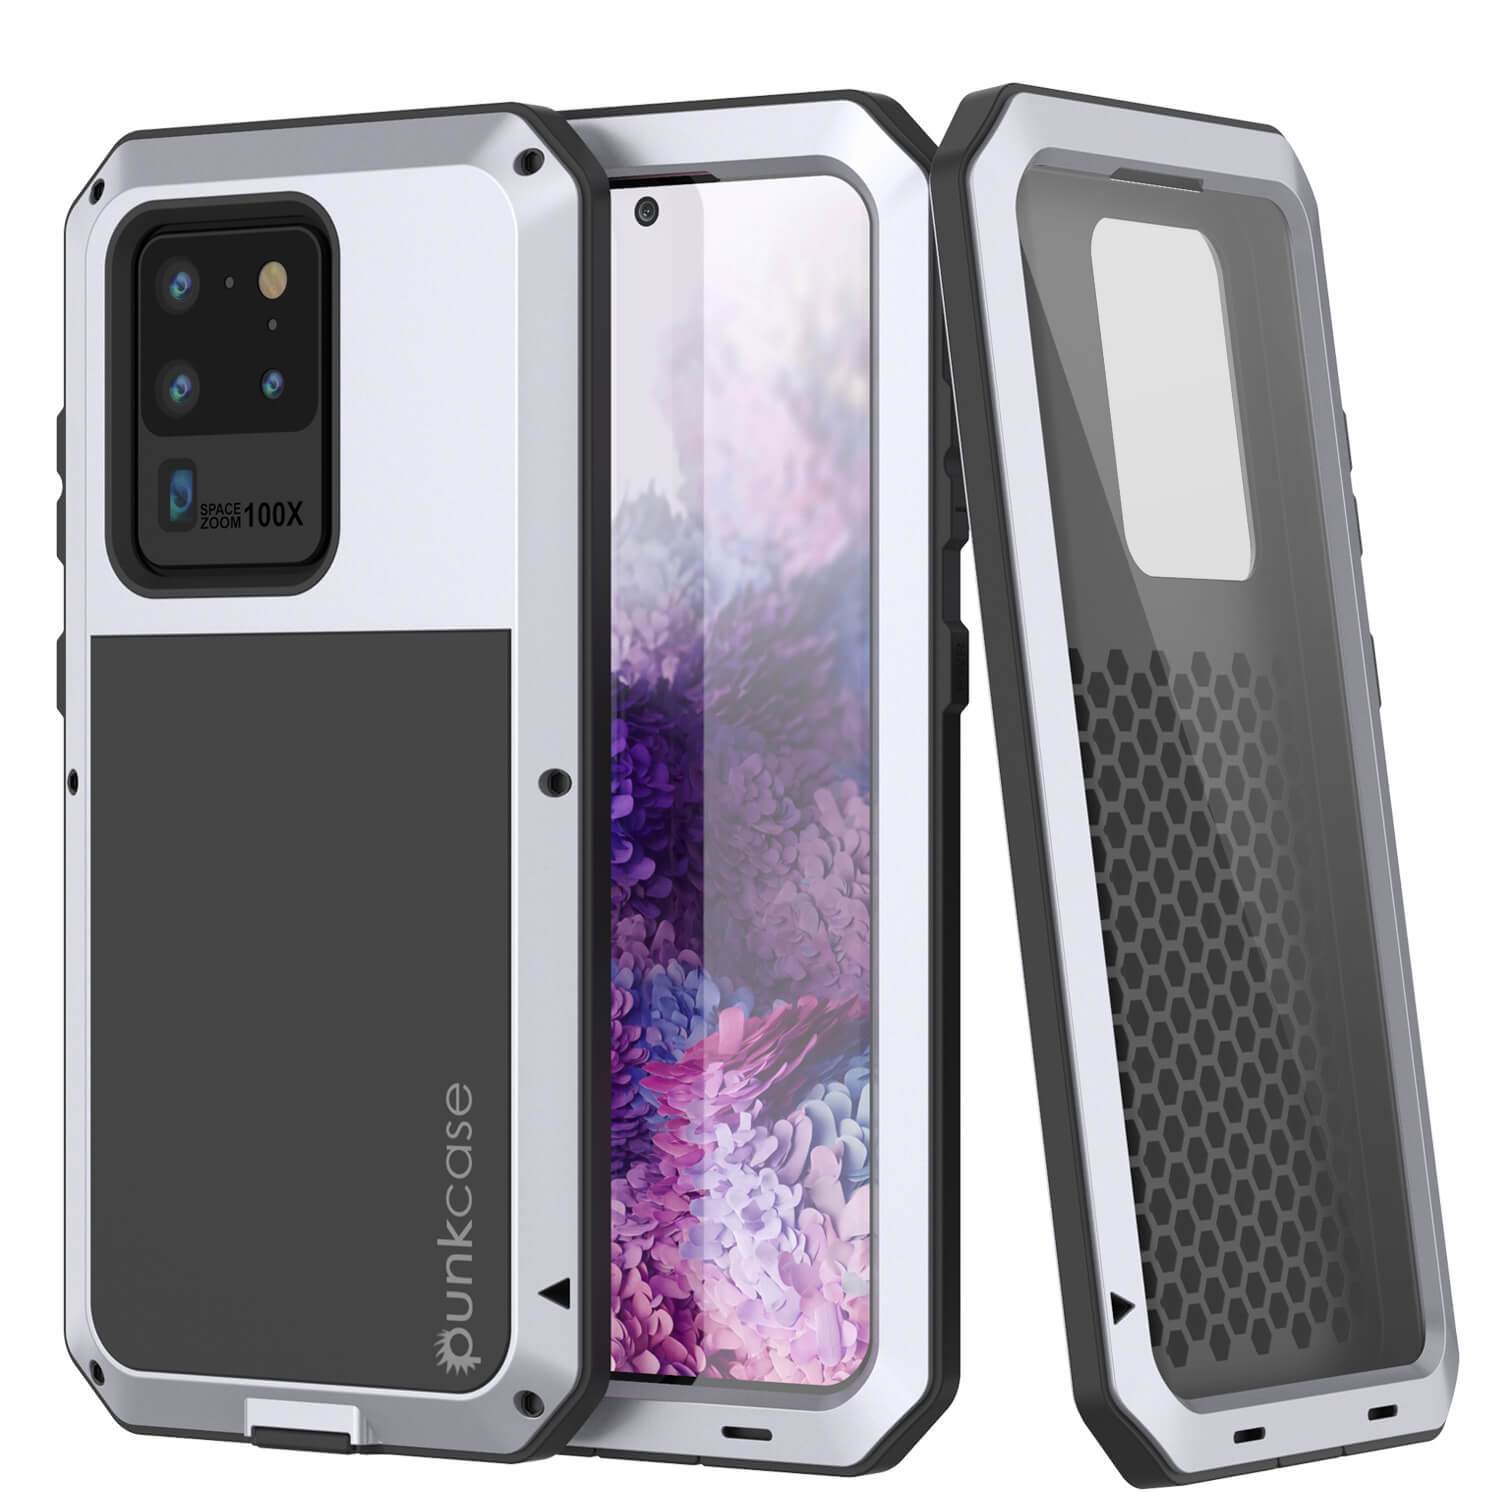 Galaxy S20 Ultra Metal Case, Heavy Duty Military Grade Rugged Armor Cover [White]